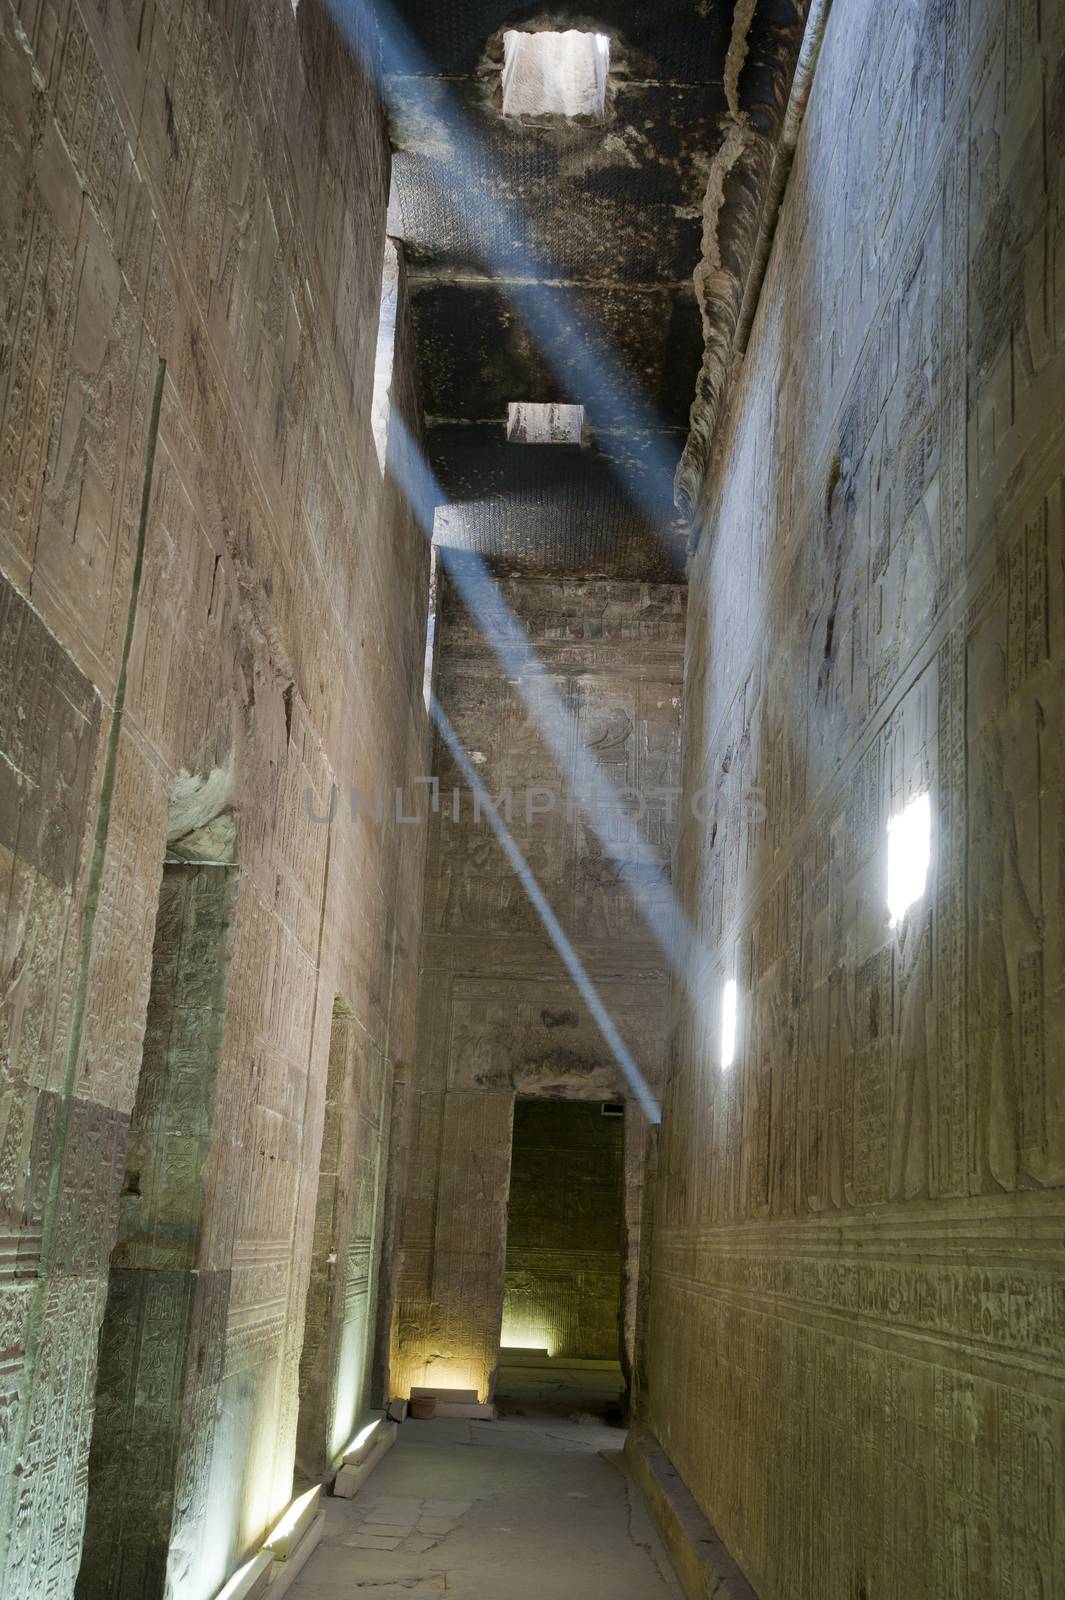 Beams of sunlight across a corridor inside an ancient egyptian temple with hieroglyphic carvings